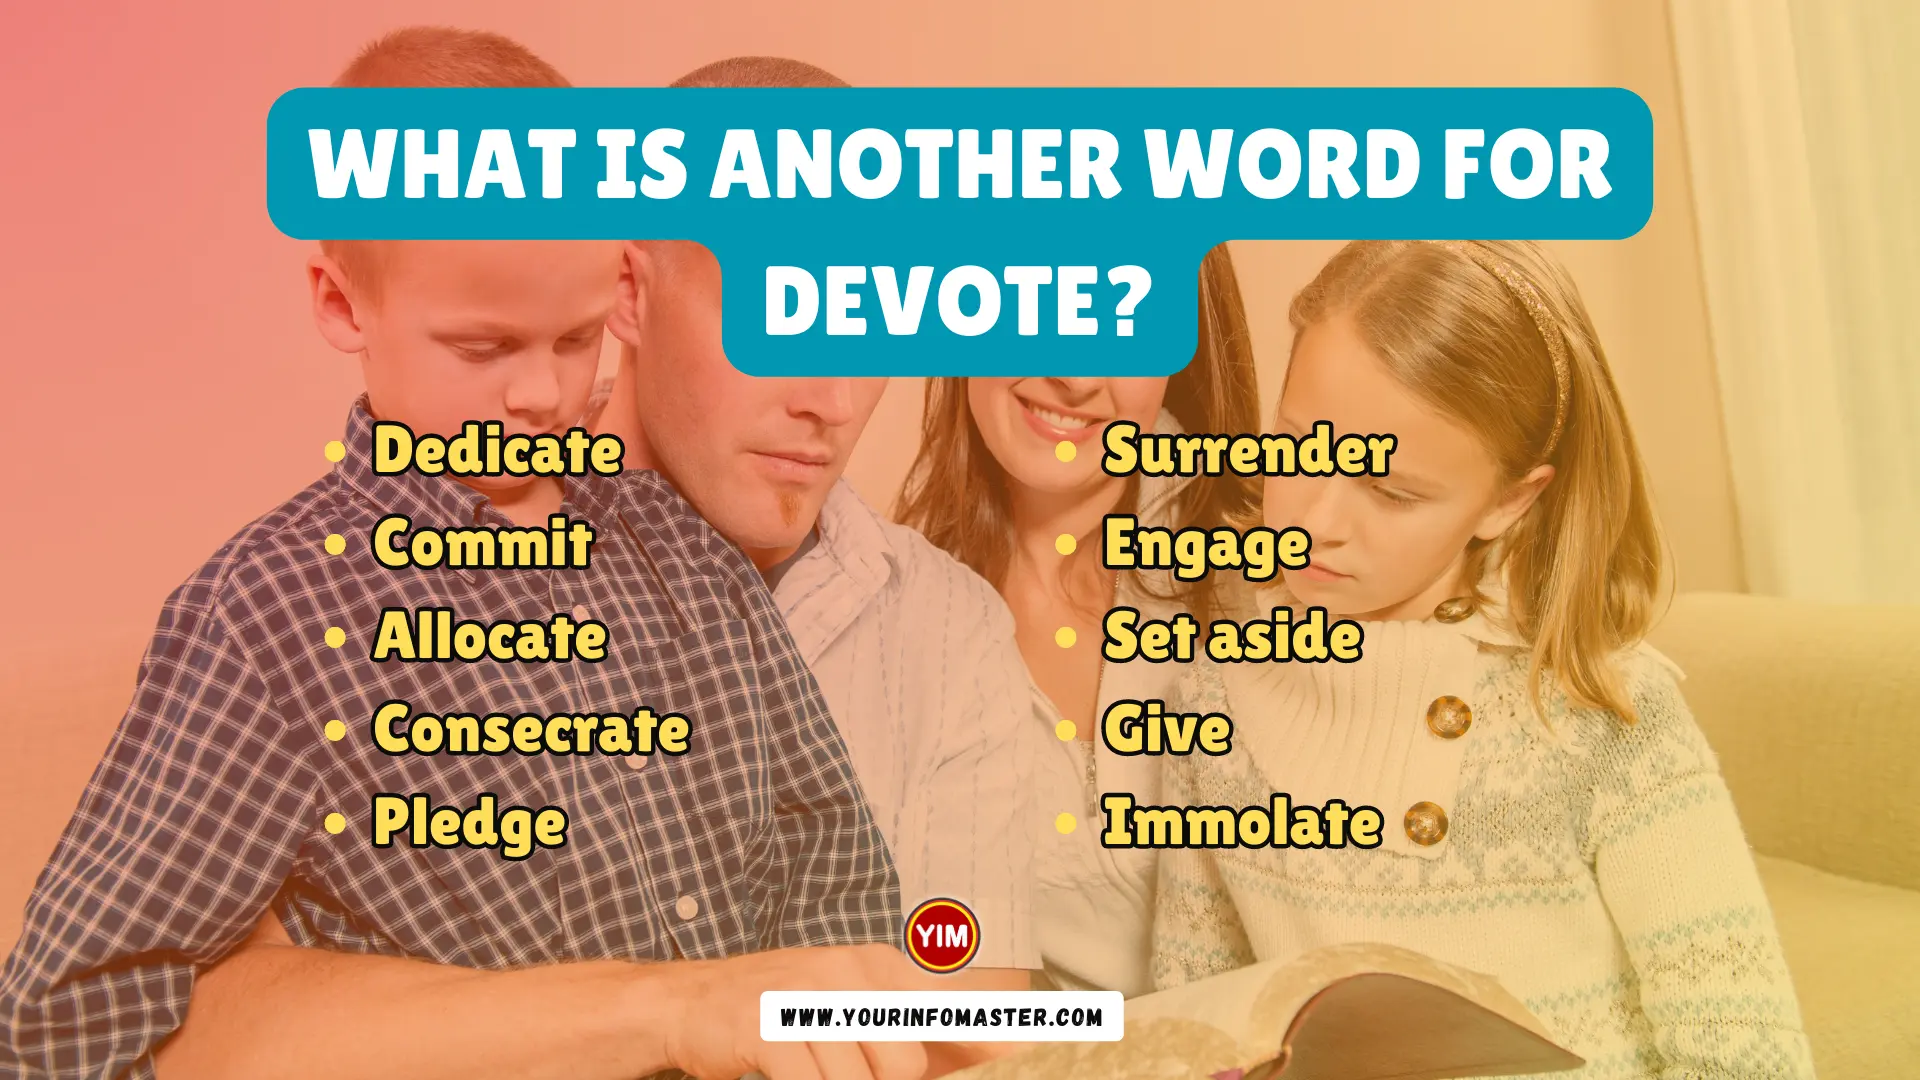 What is another word for Devote